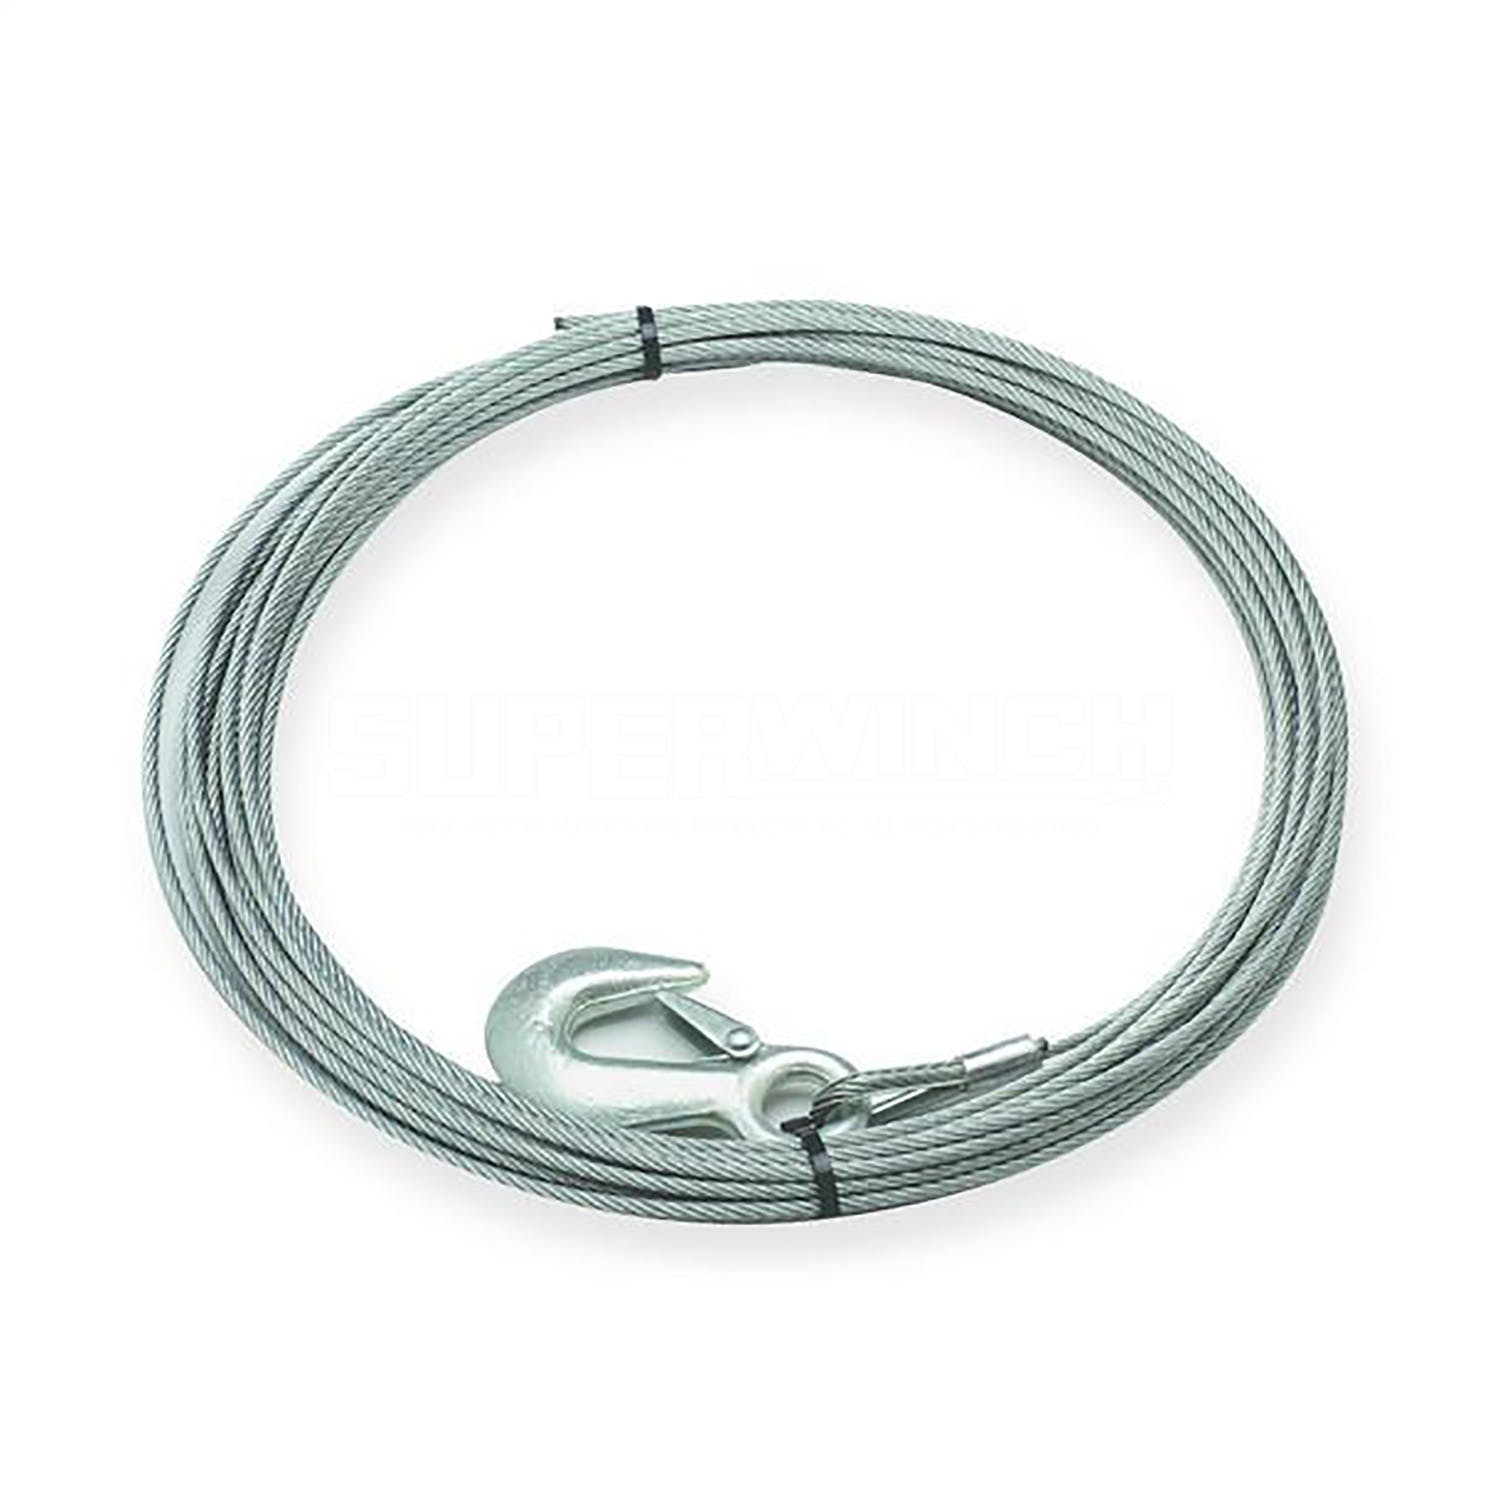 Superwinch 90-12879 Replacement Wire Rope 3/8 diameter x 85 length